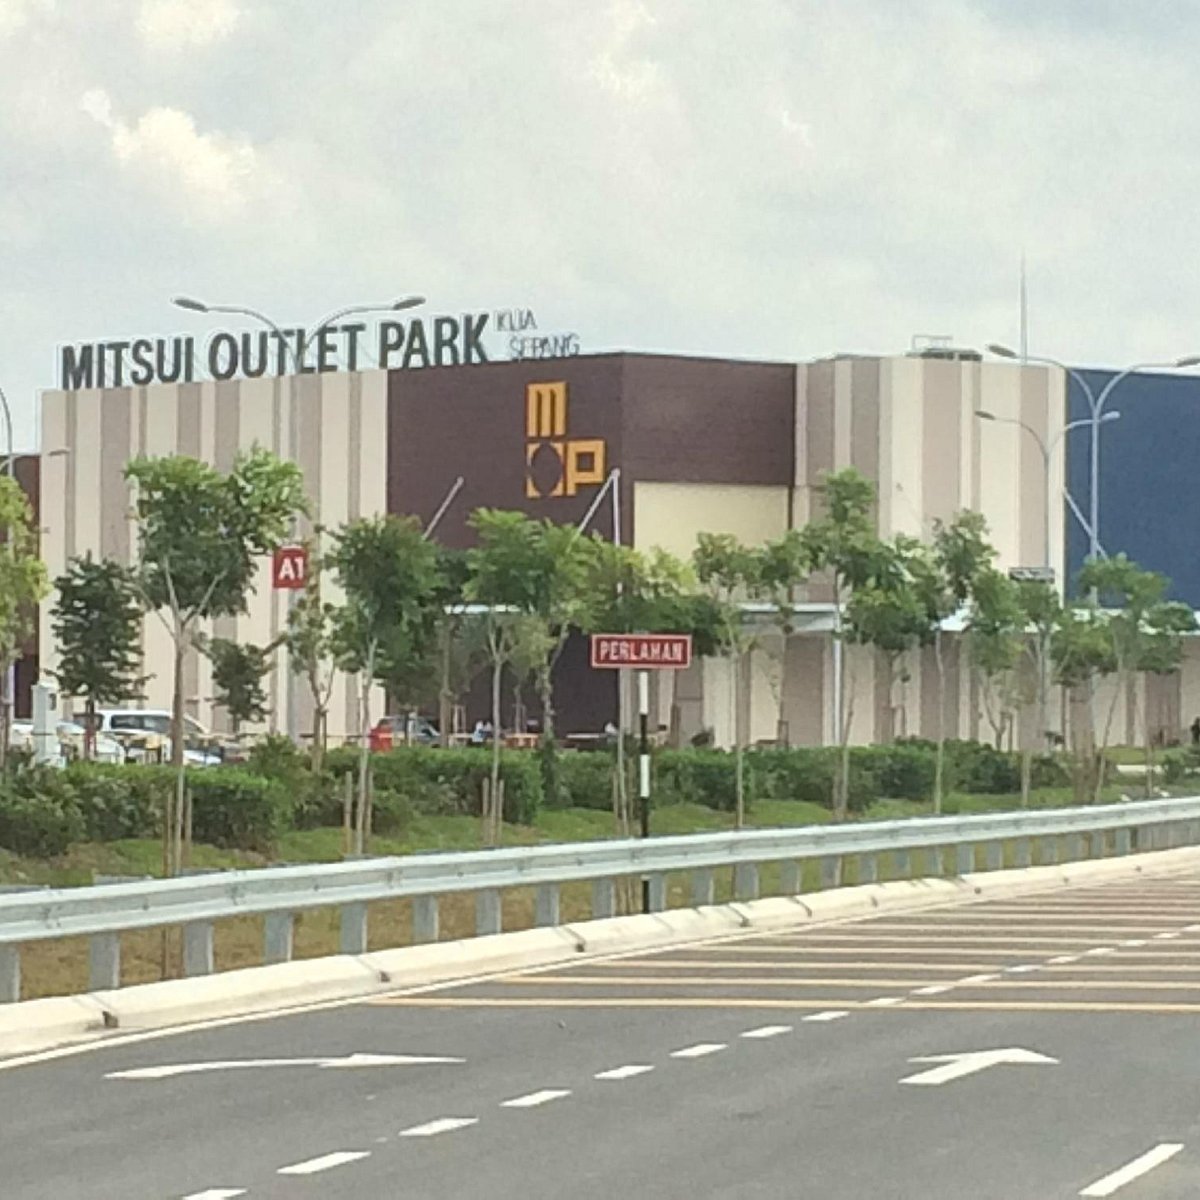 Mitsui outlet promotion 2021